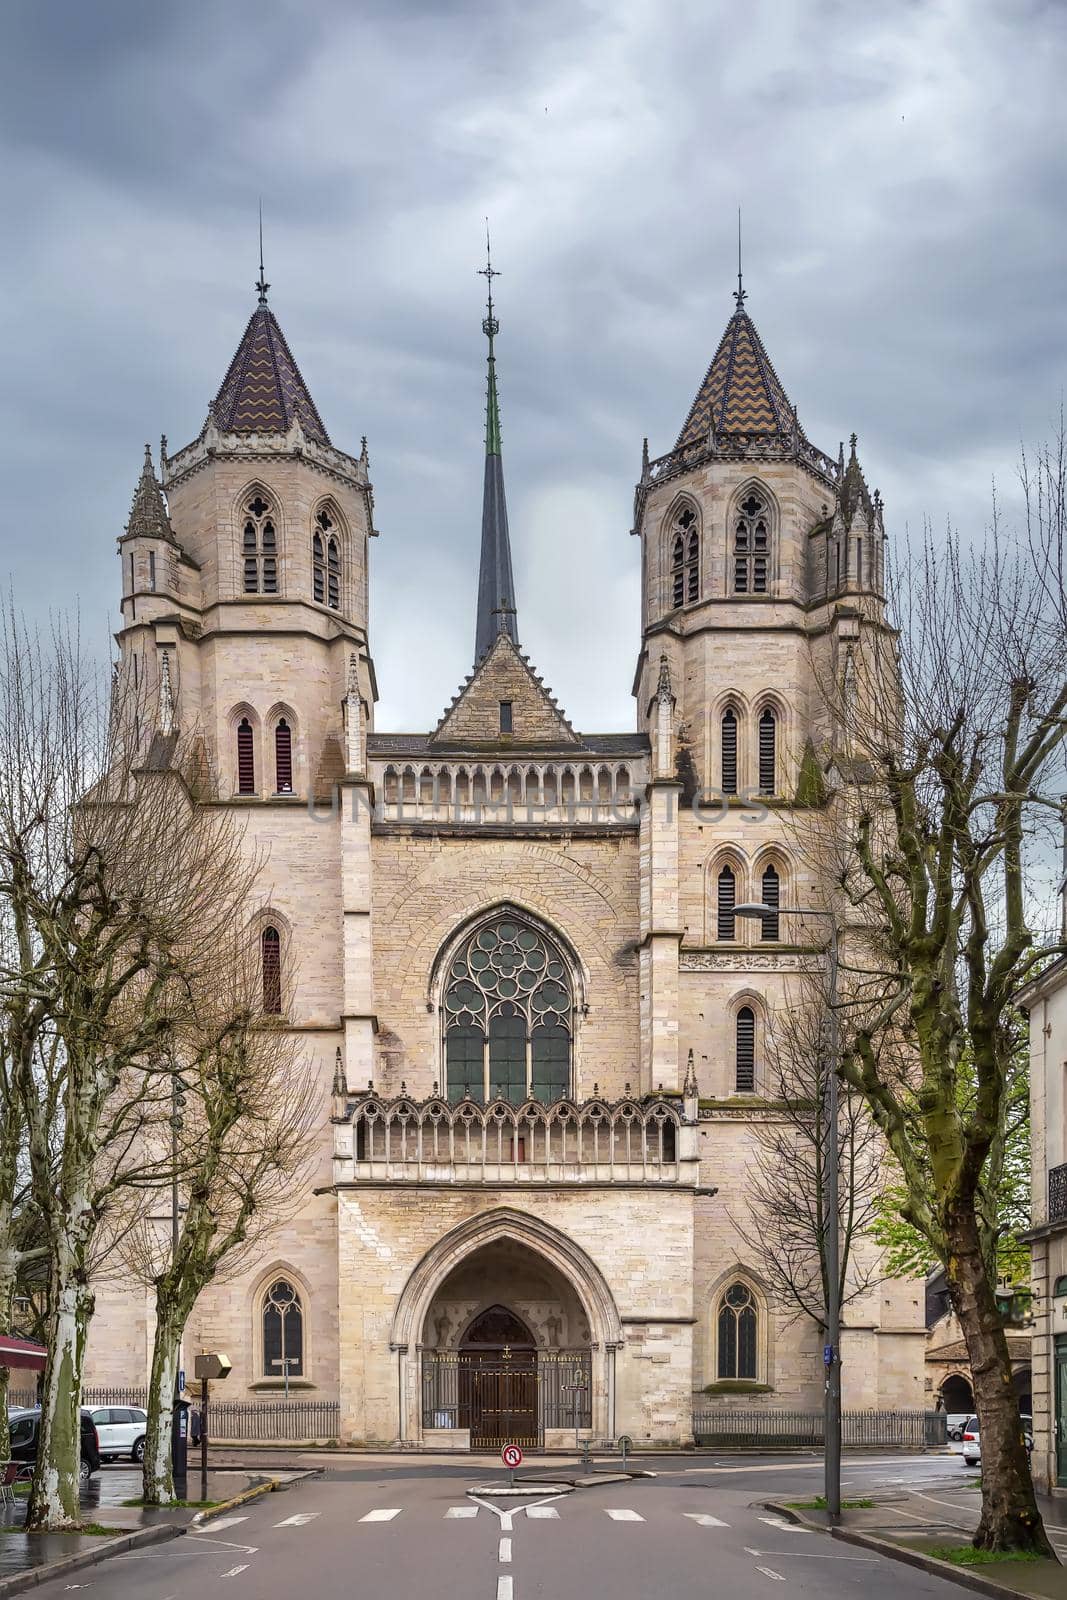 Dijon Cathedral, or Cathedral of Saint Benignus of Dijon is a Roman Catholic church located in the town of Dijon, Burgundy, France